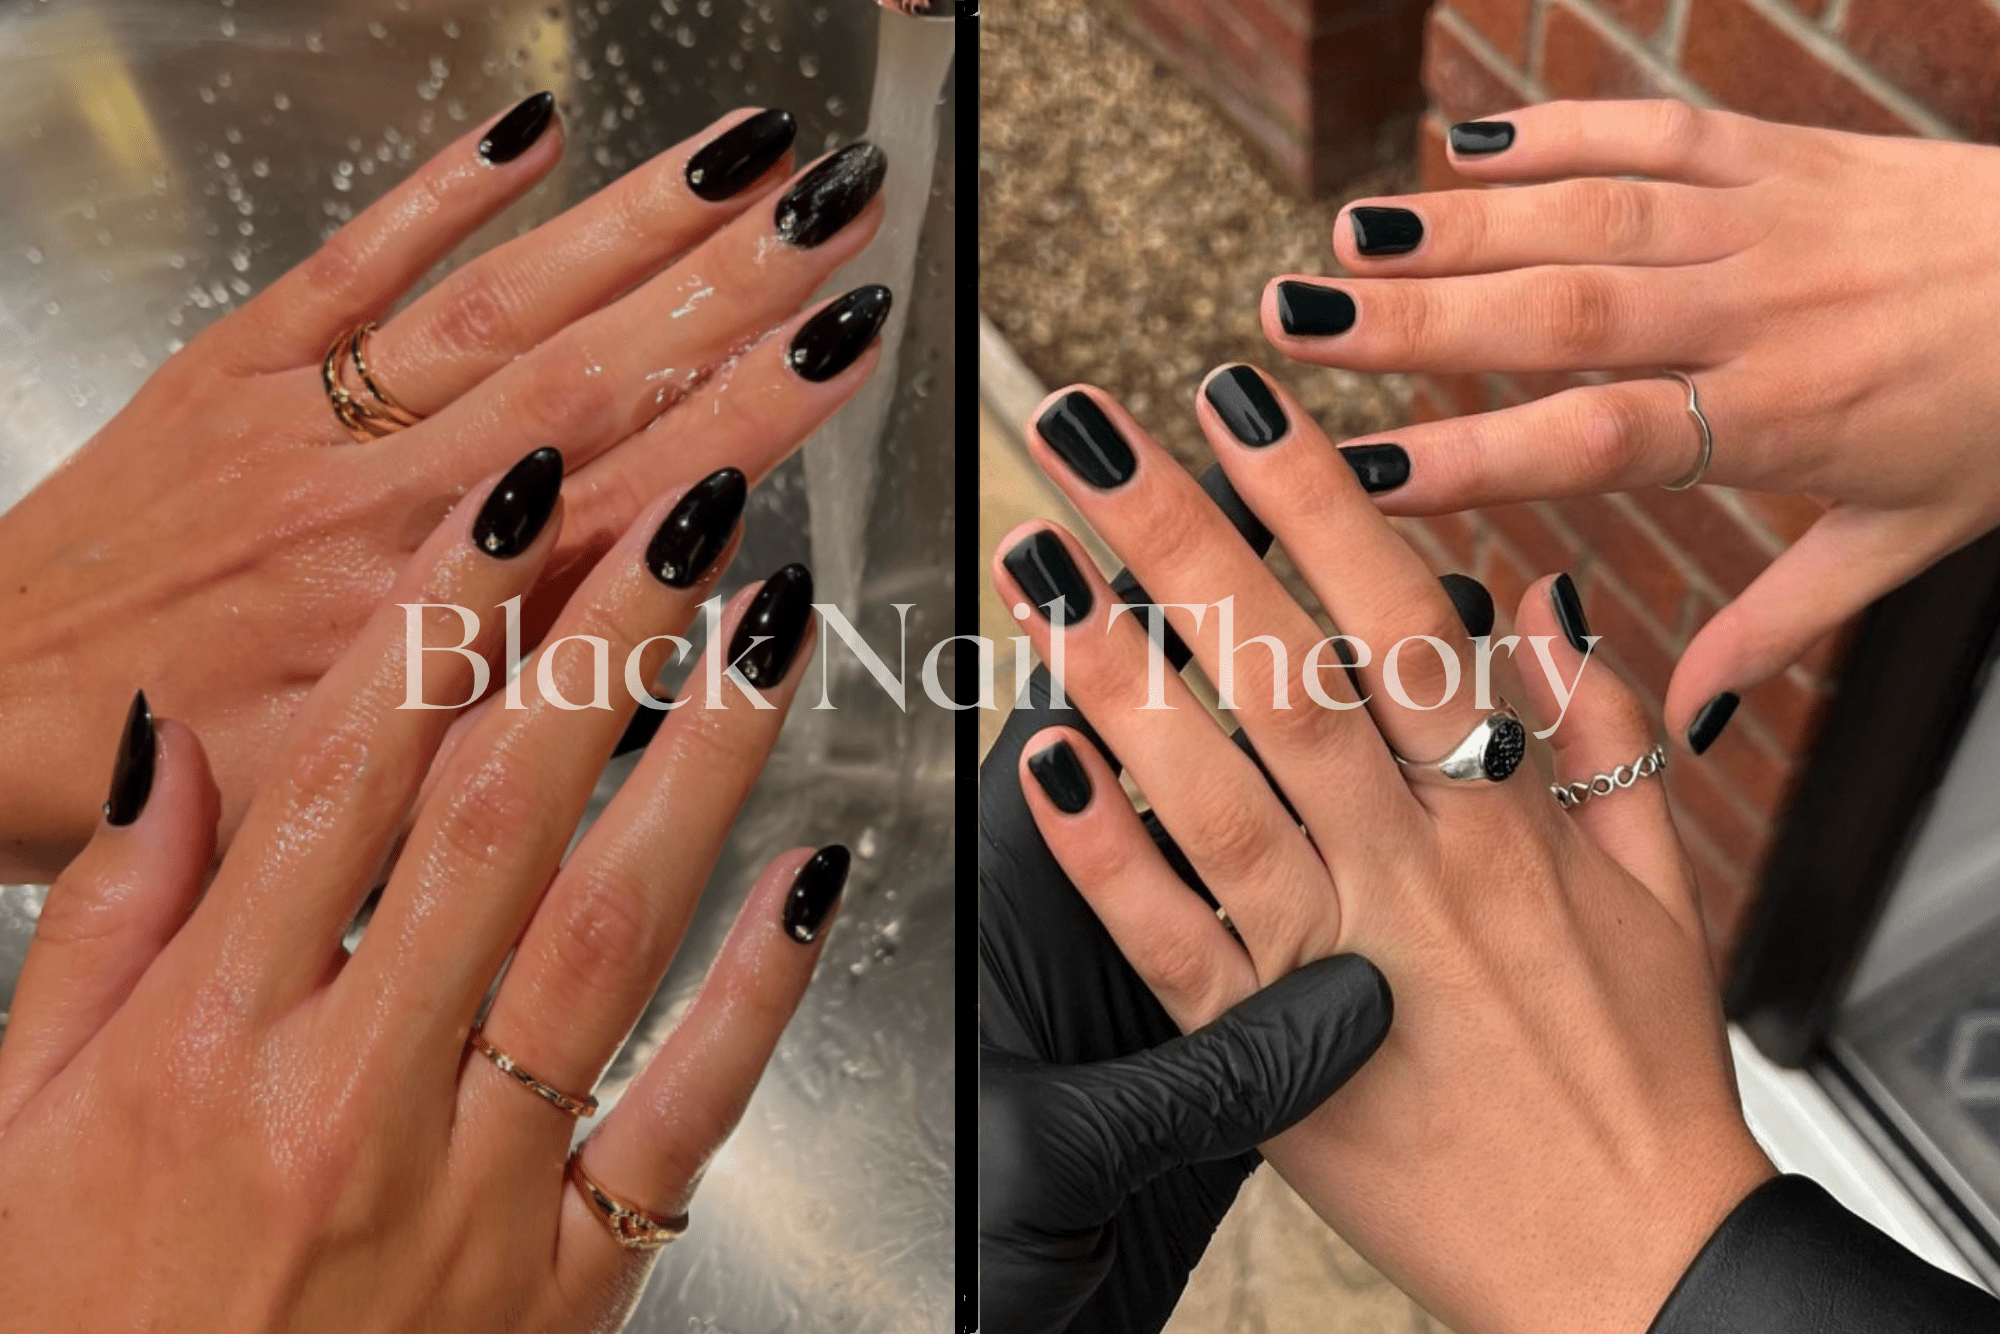 “Black Nail Theory”: What does the new TikTok trend say?